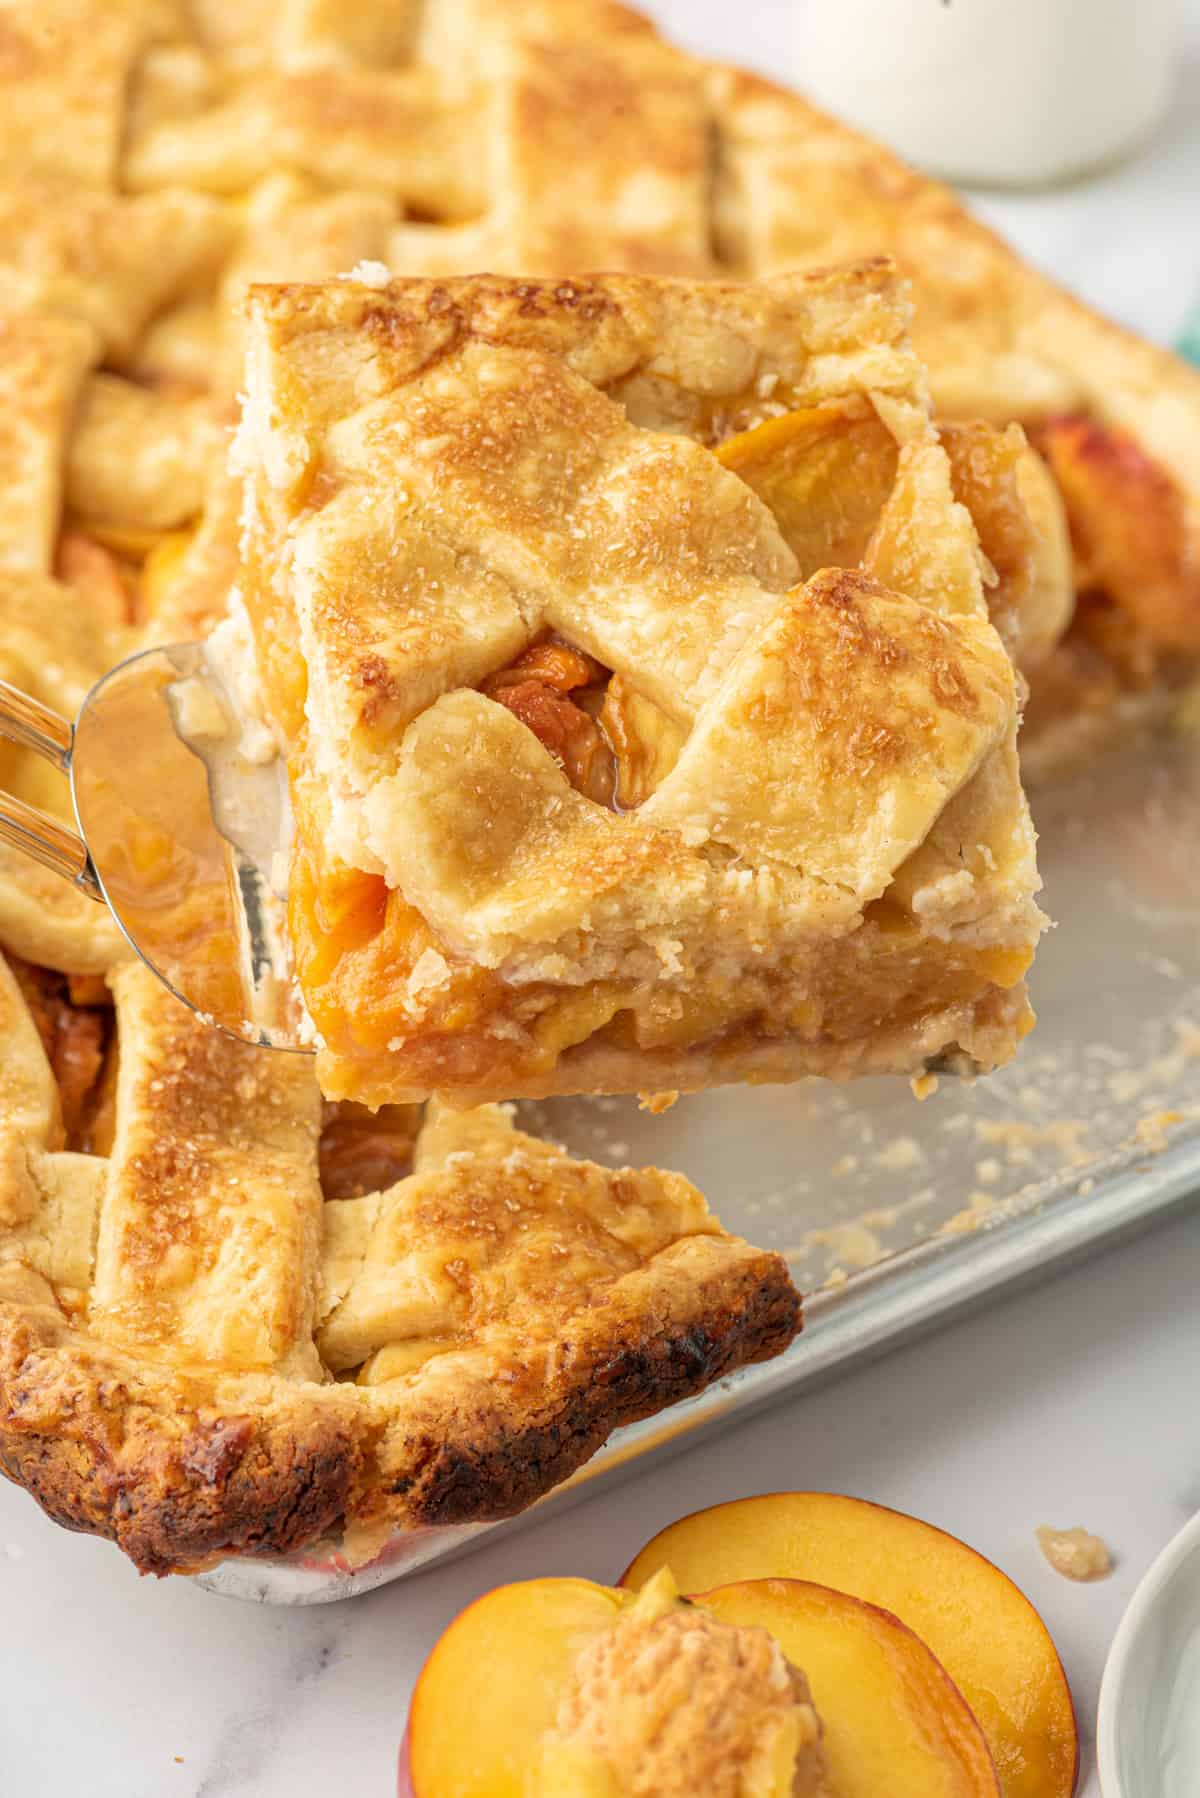 A slice of peach slab pie is being lifted from the pie dish.